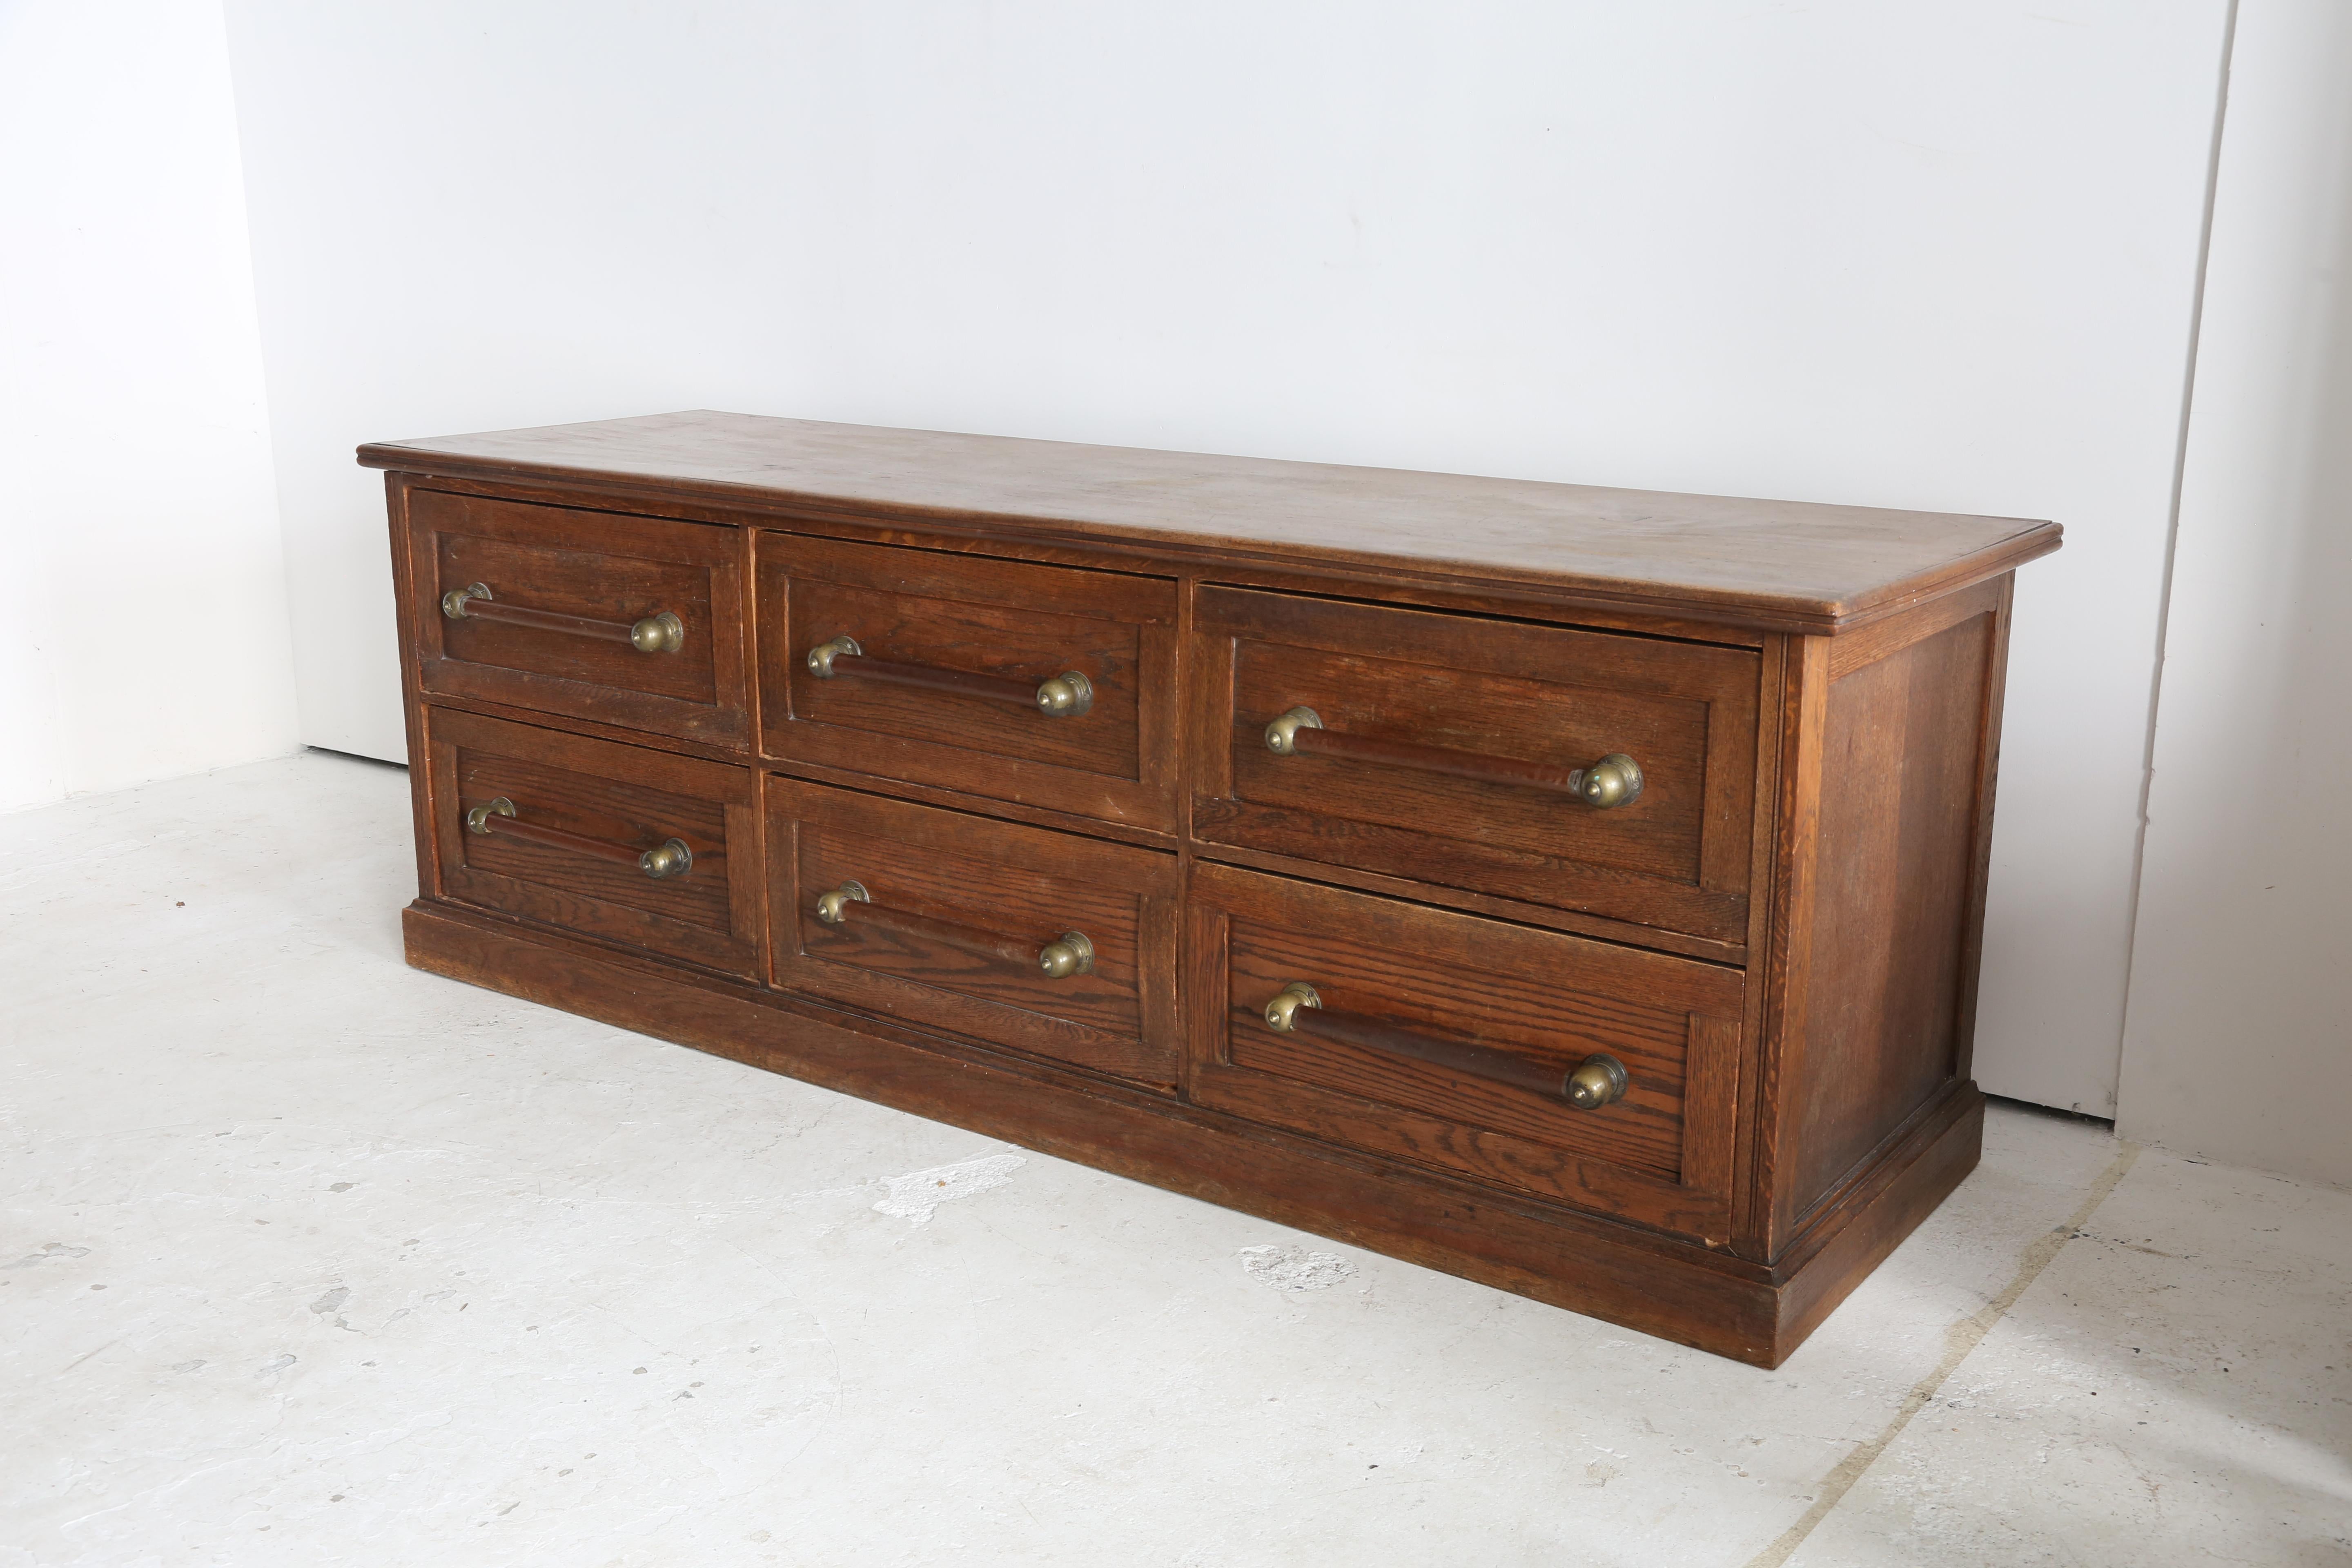 British 1930s Oak and Mahogany Haberdashery Drawer Units.  In Good Condition For Sale In London, England